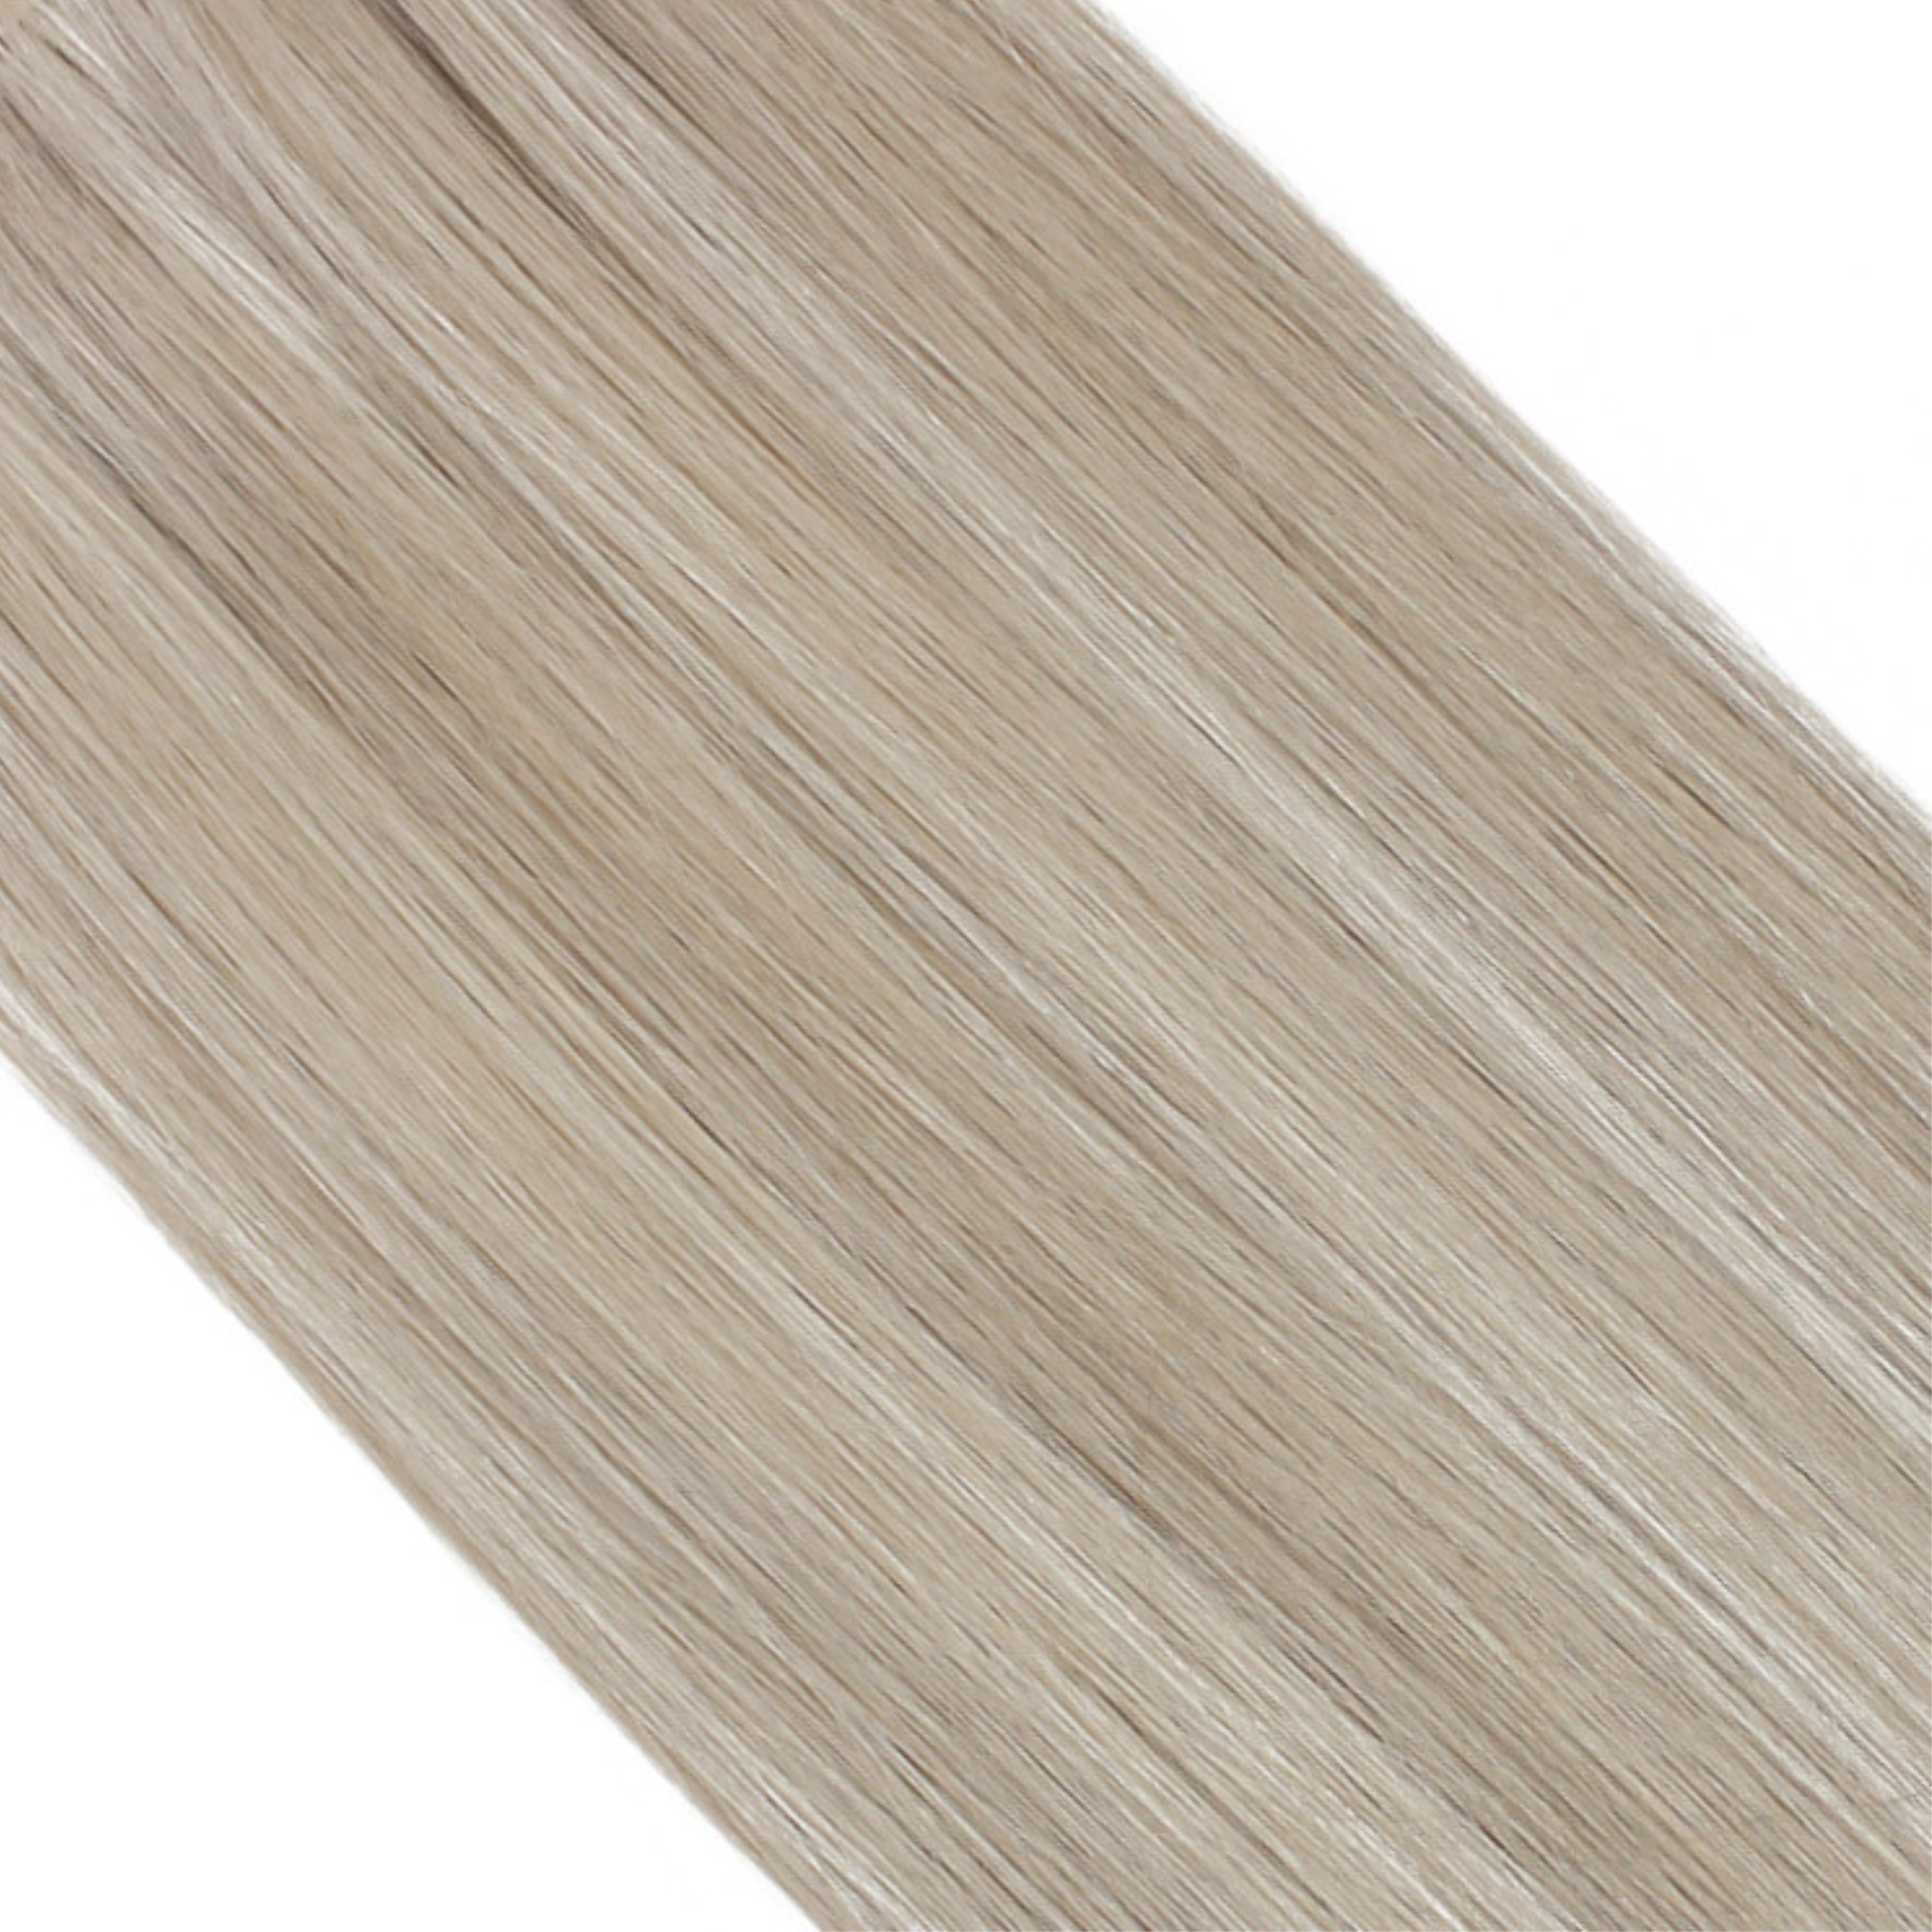 "hair rehab london 22" tape hair extensions shade swatch titled steel blonde"